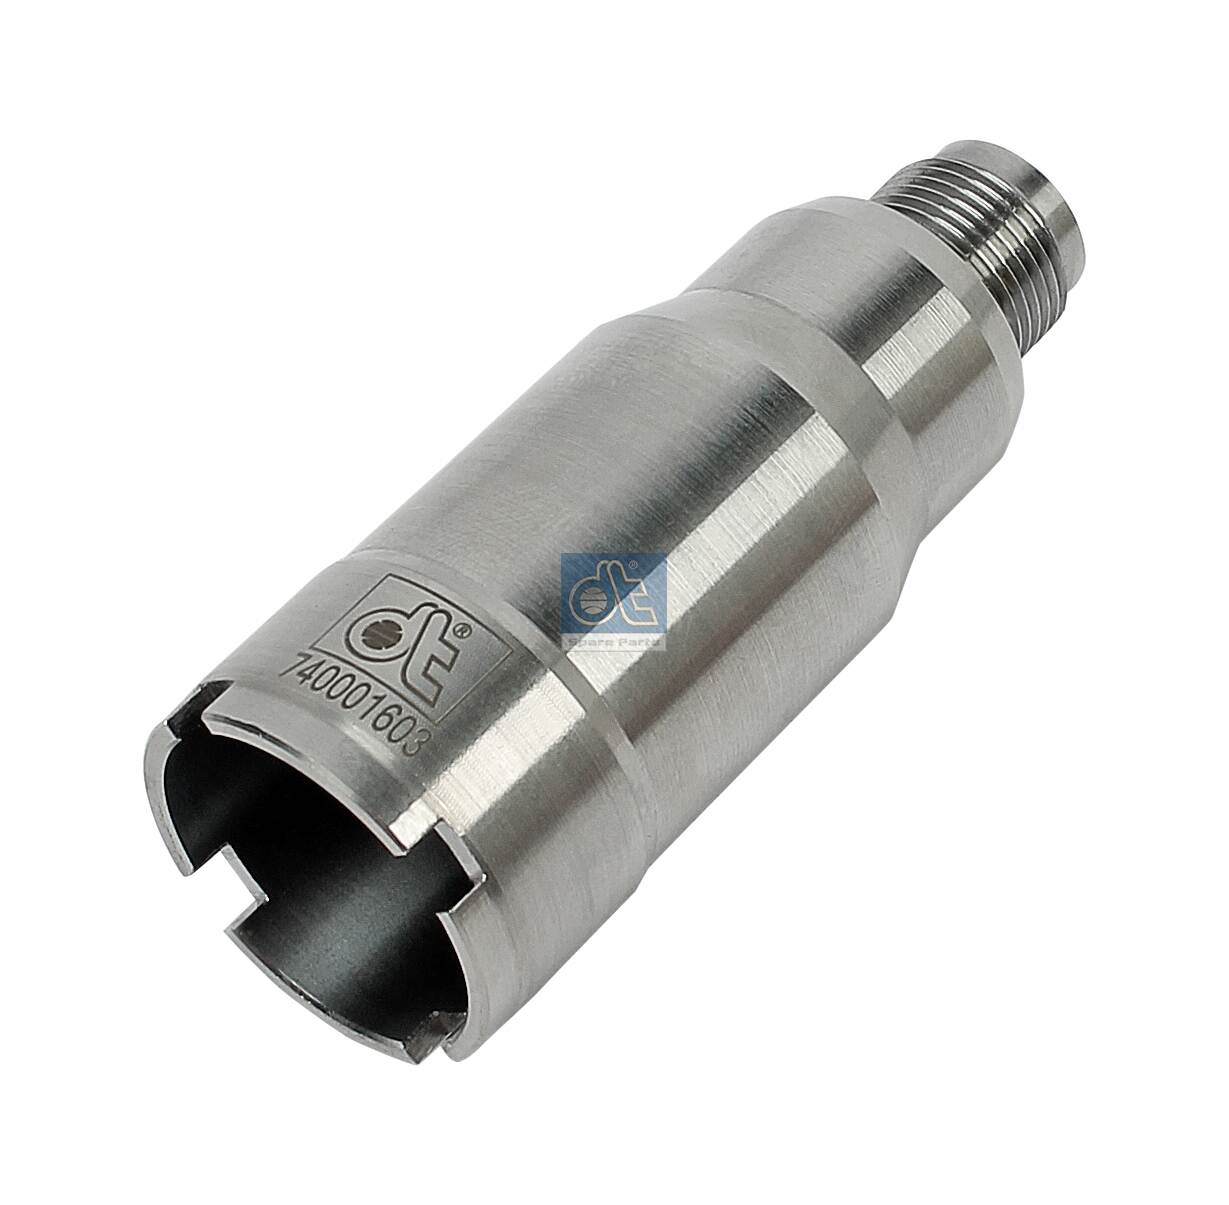 4.40267, Sleeve, nozzle holder, DT Spare Parts, 9060170488, A9060170488, 010124900000, 0110128, 171108, 20.0103.90600, 203.470, 4047755967031, 80316, 01.10.128, 20010390600, 203470, 4047755967024